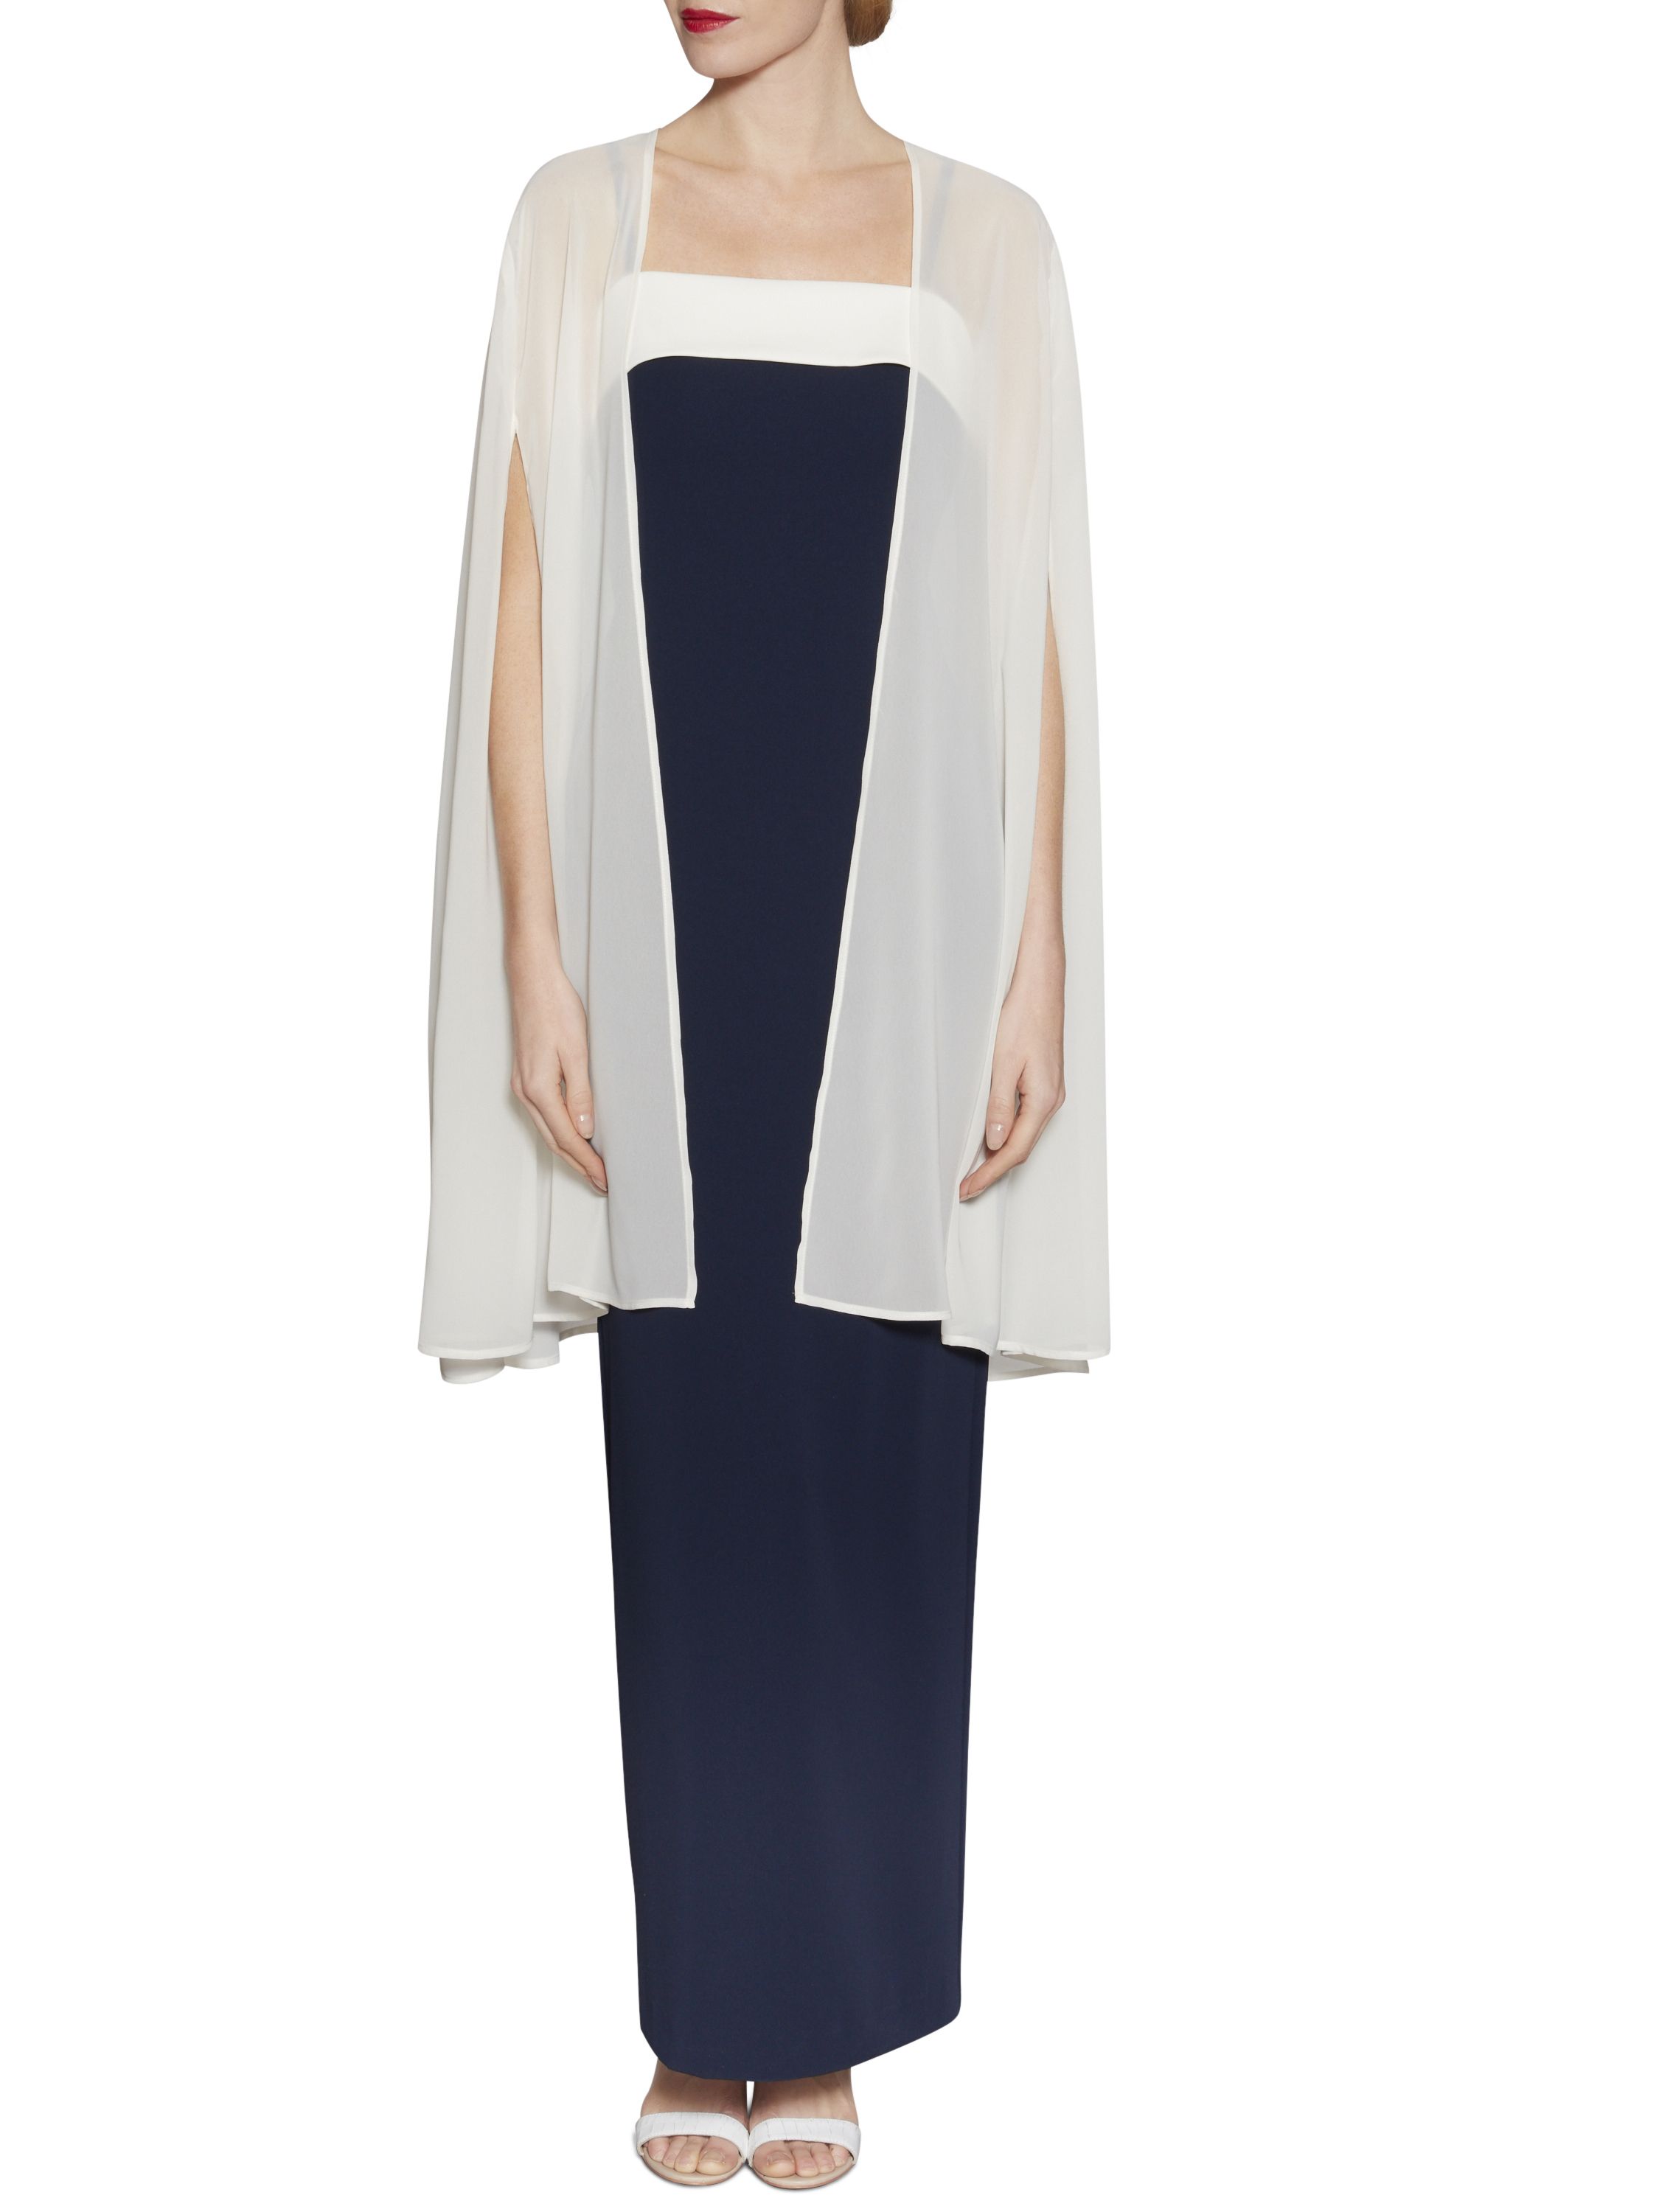 Complete any evening look and feel stunning on those chilly nights with this chiffon cape by Gina Bacconi. The cape is made out of chiffon and is crafted to sit effortlessly on the shoulders. Long and elegant, the cape features armholes for ease of movement. The perfect cover up for any dress.